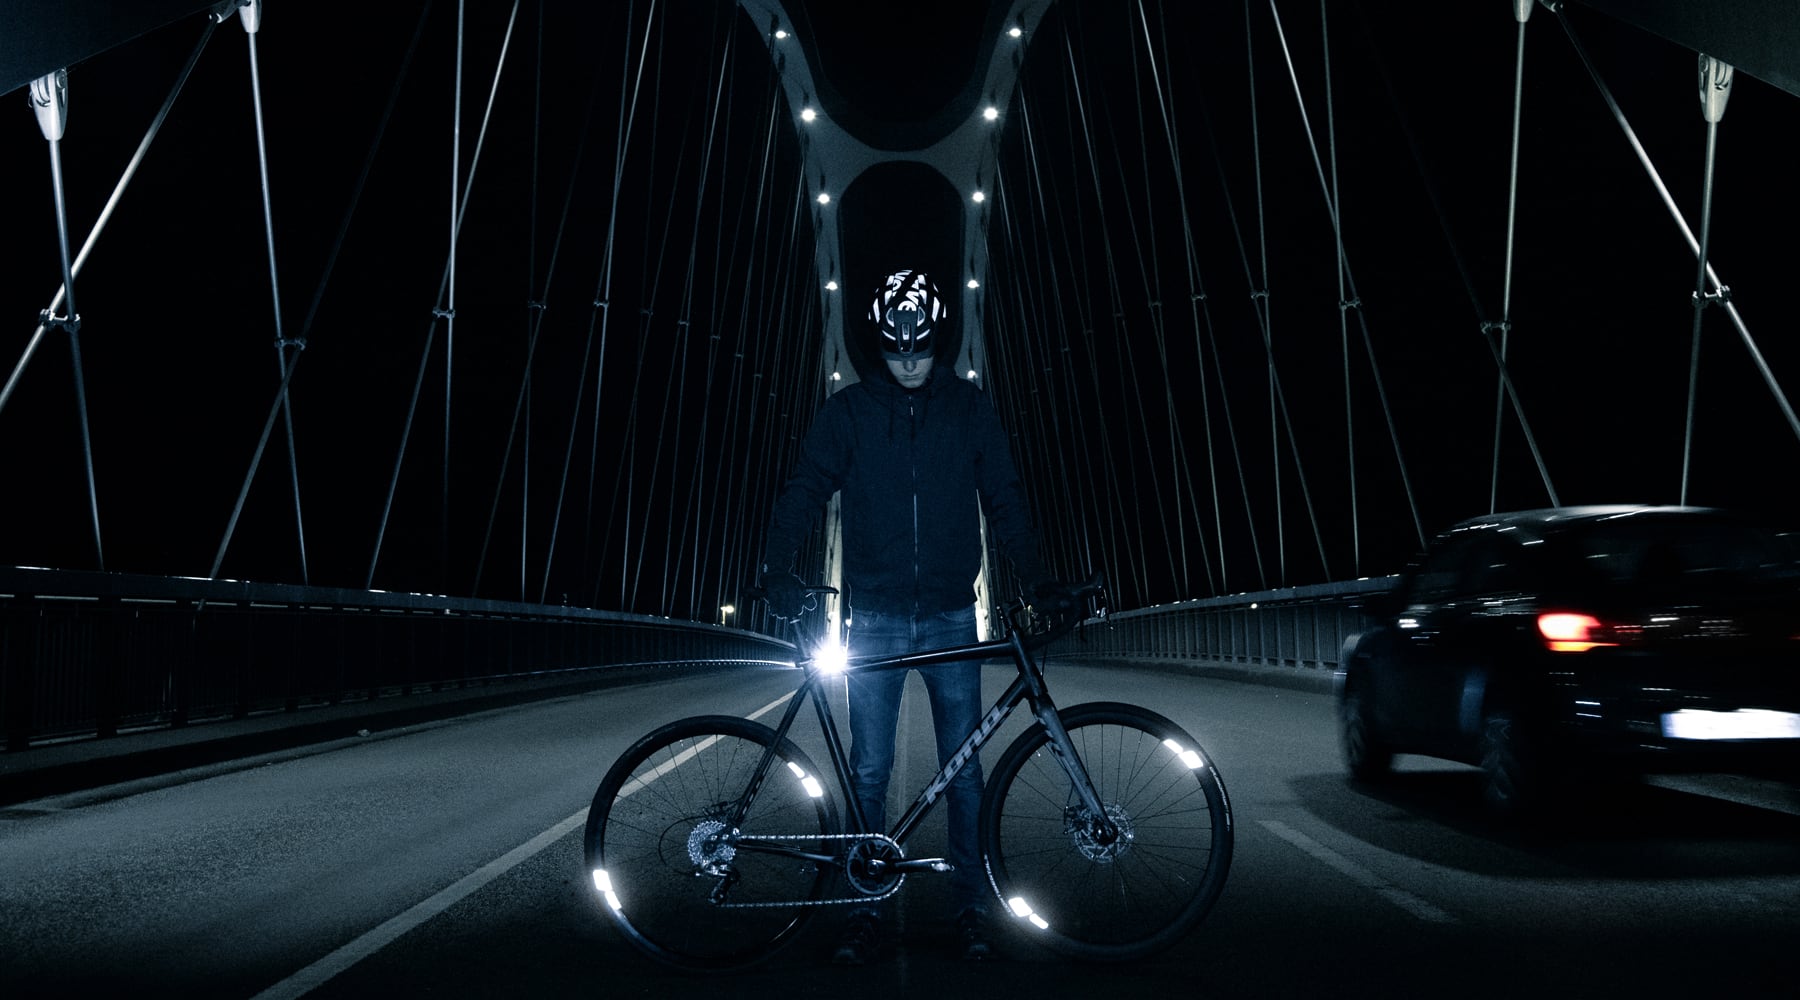 FLECTR 360 OMNI - The bicycle wheel reflector with 360 degree reflectivity.